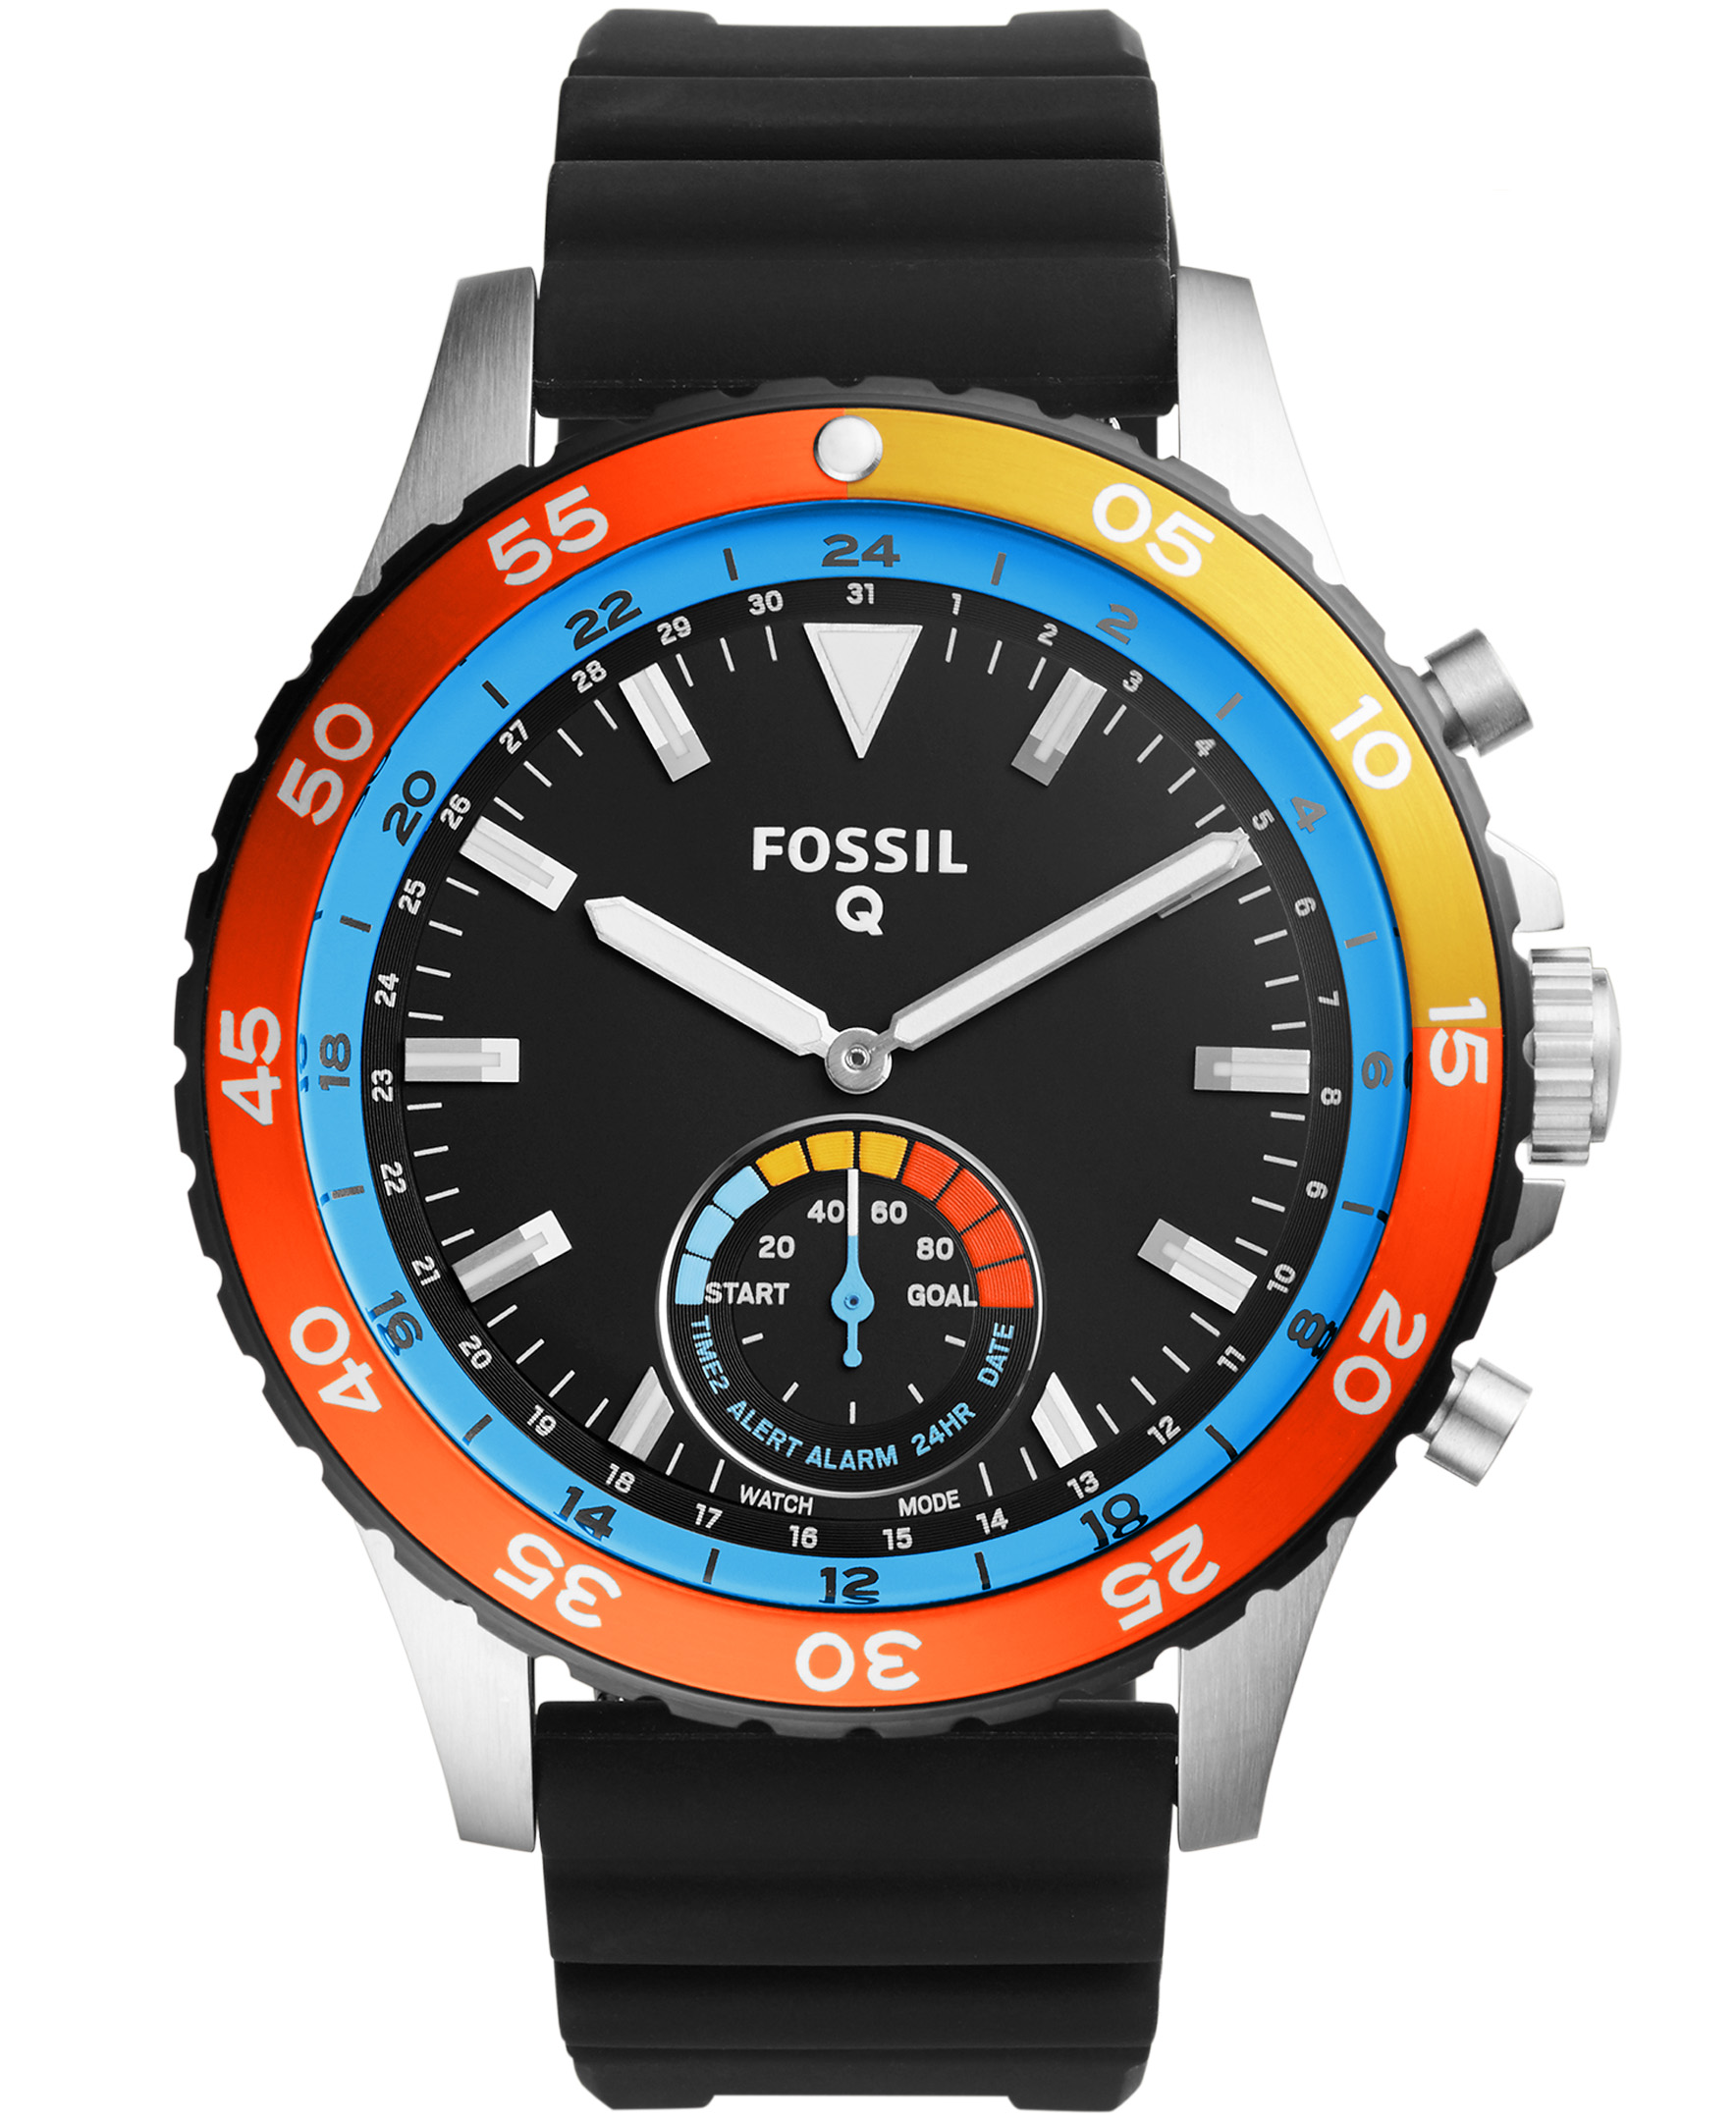 Fossil Launches Four New Hybrid Smartwatches For the Q Lineup (With Pricing)